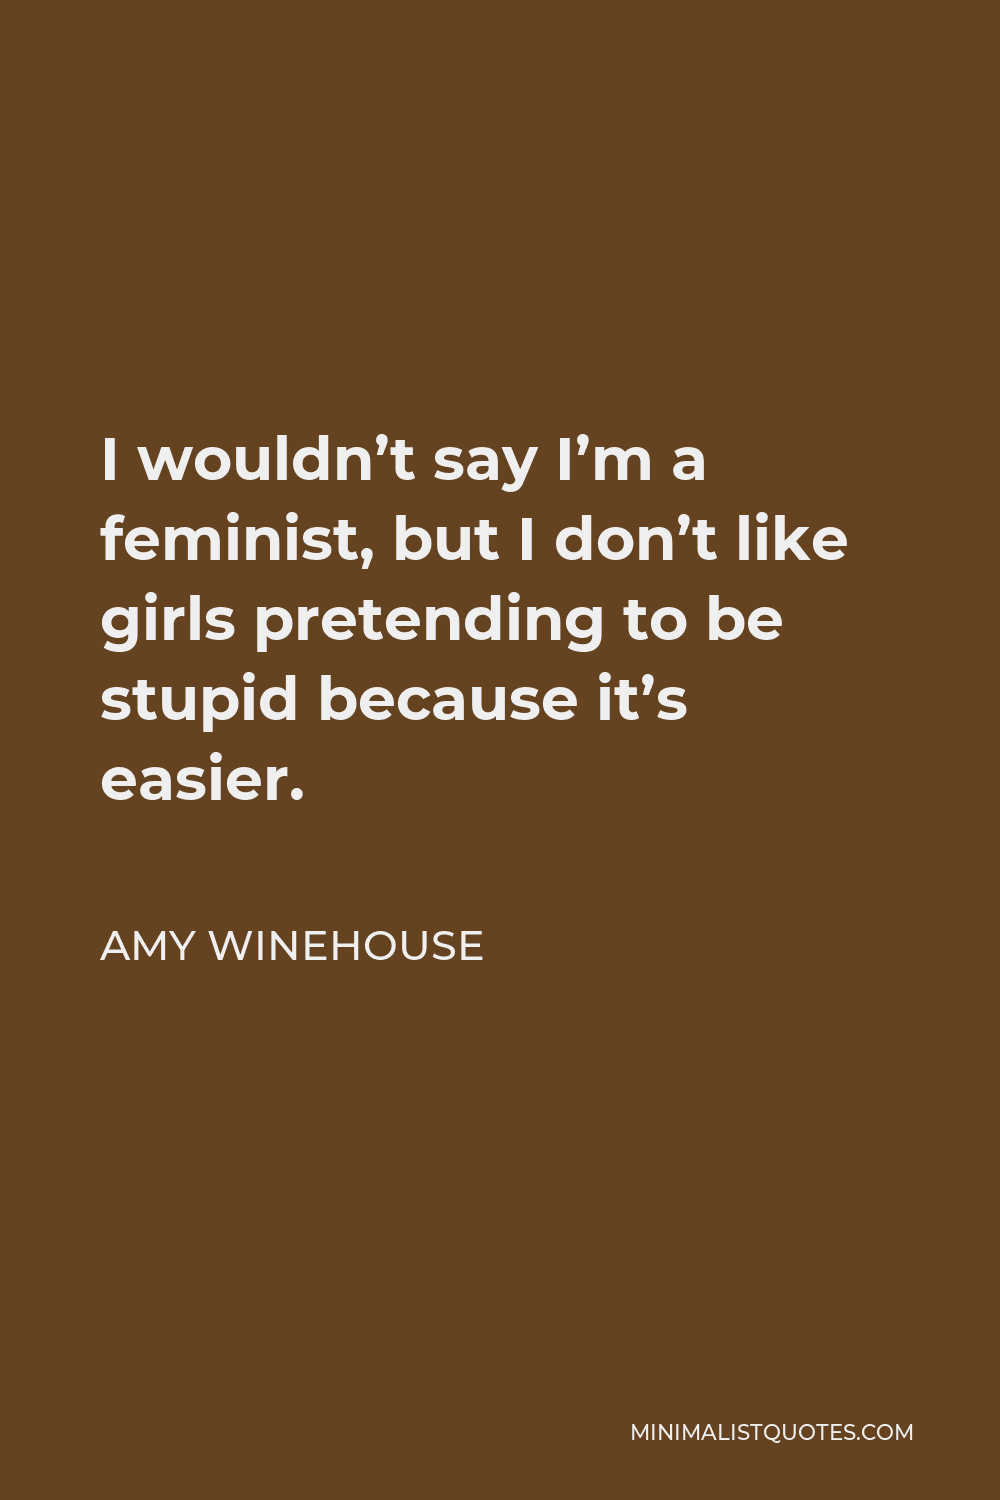 Amy Winehouse Quote - I wouldn’t say I’m a feminist, but I don’t like girls pretending to be stupid because it’s easier.